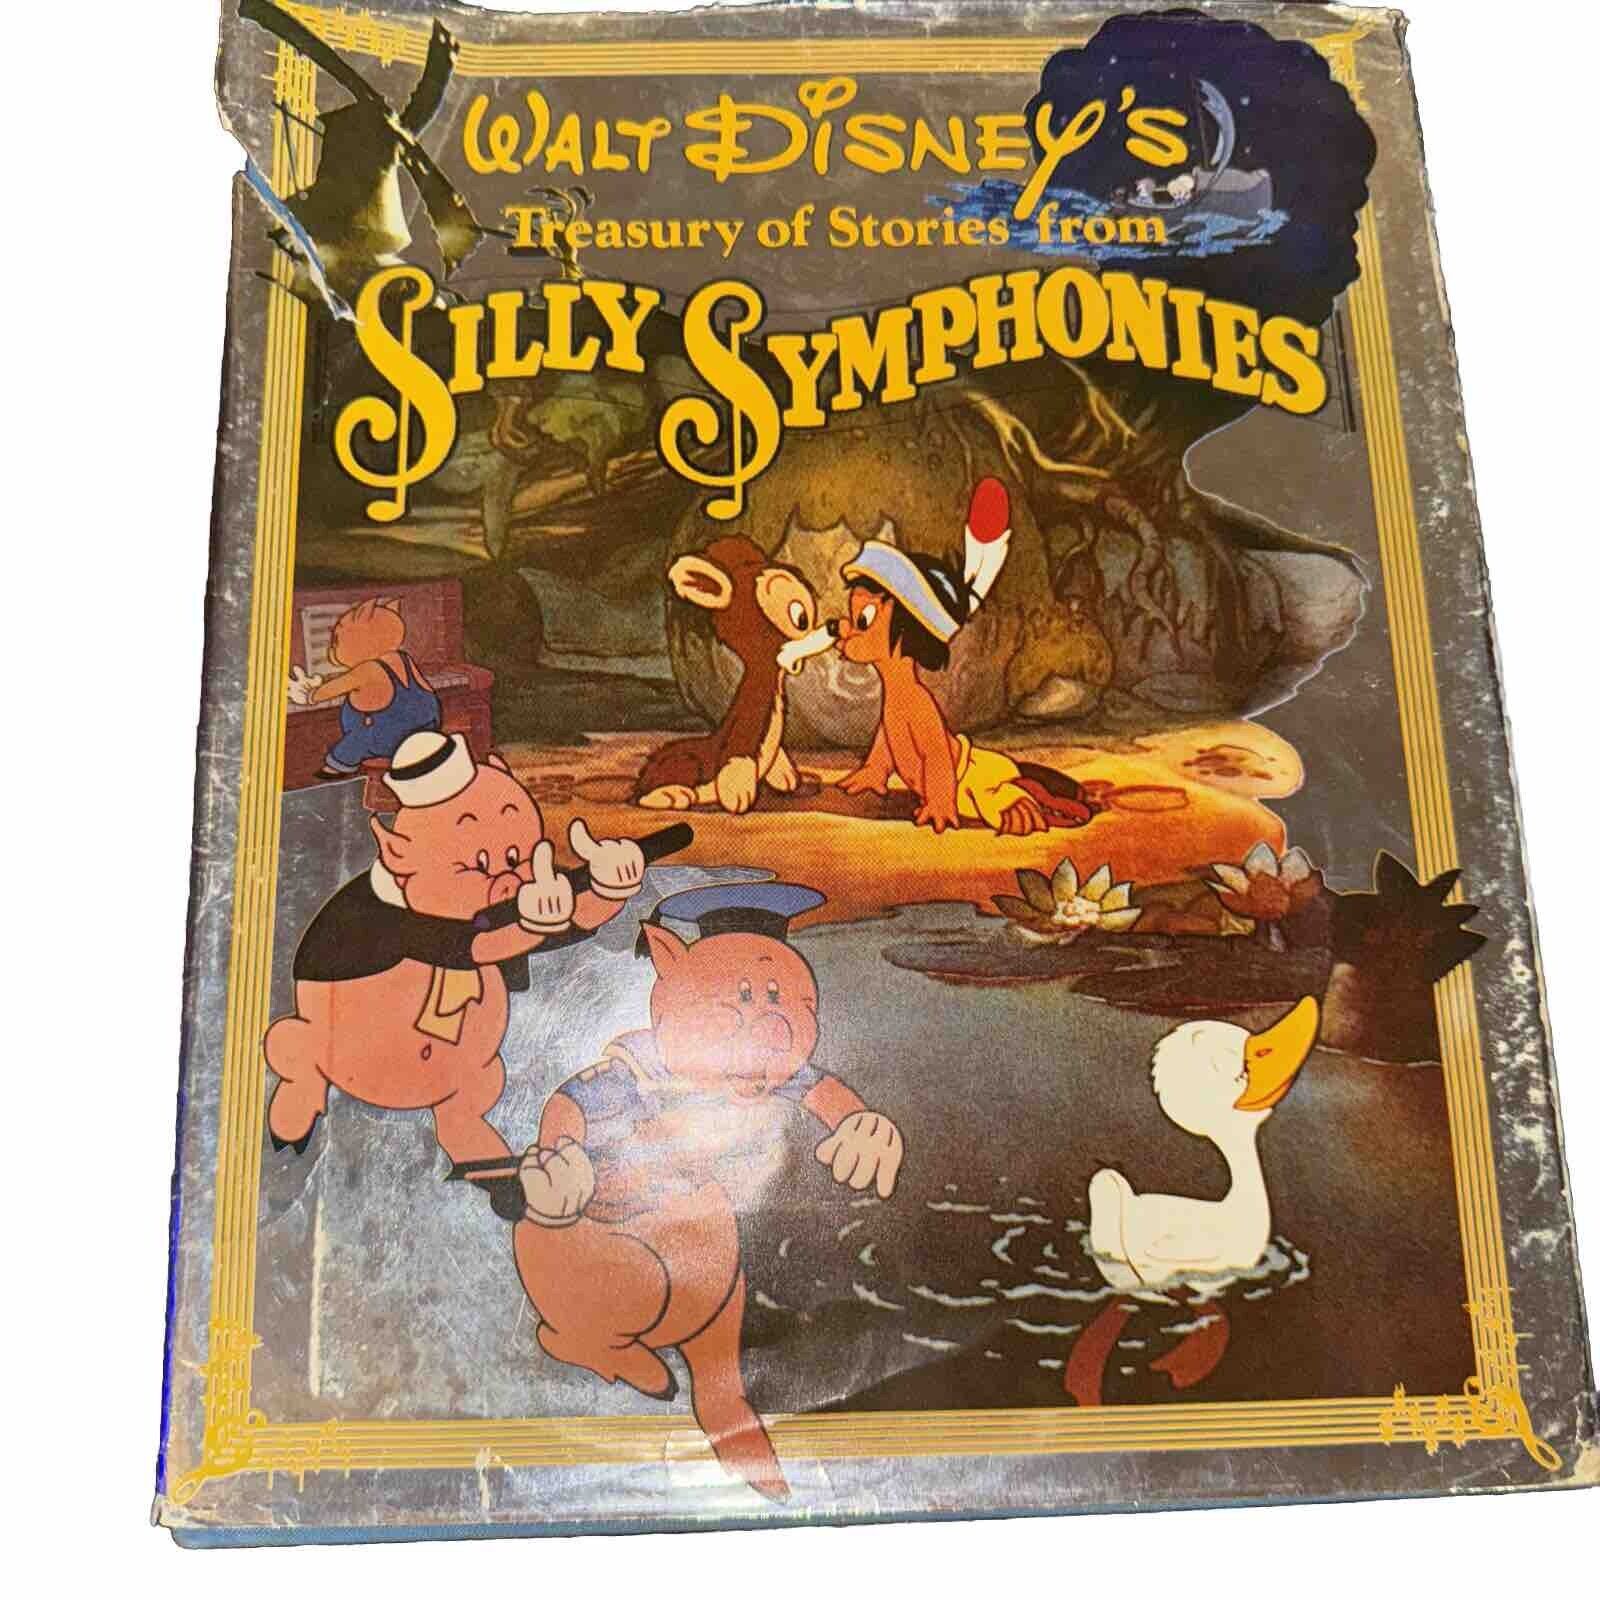 Walt Disney's Treasury of Stories from Silly Symphonies (1981, Hardcover)